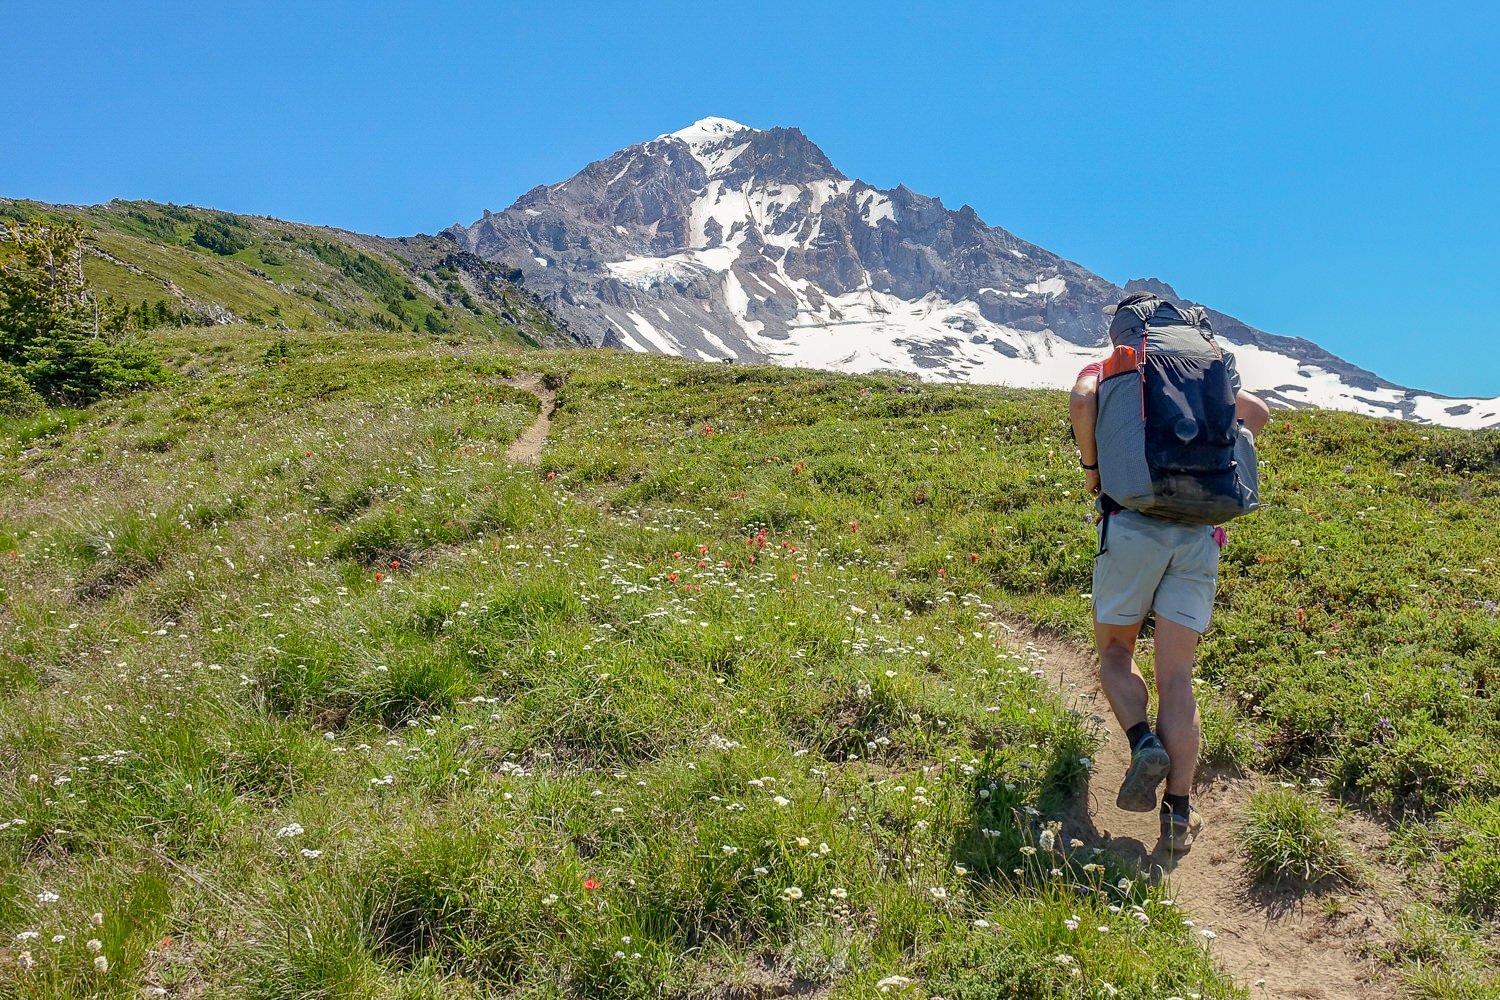 A backpacker hiking towards Mt. Hood during the summer.